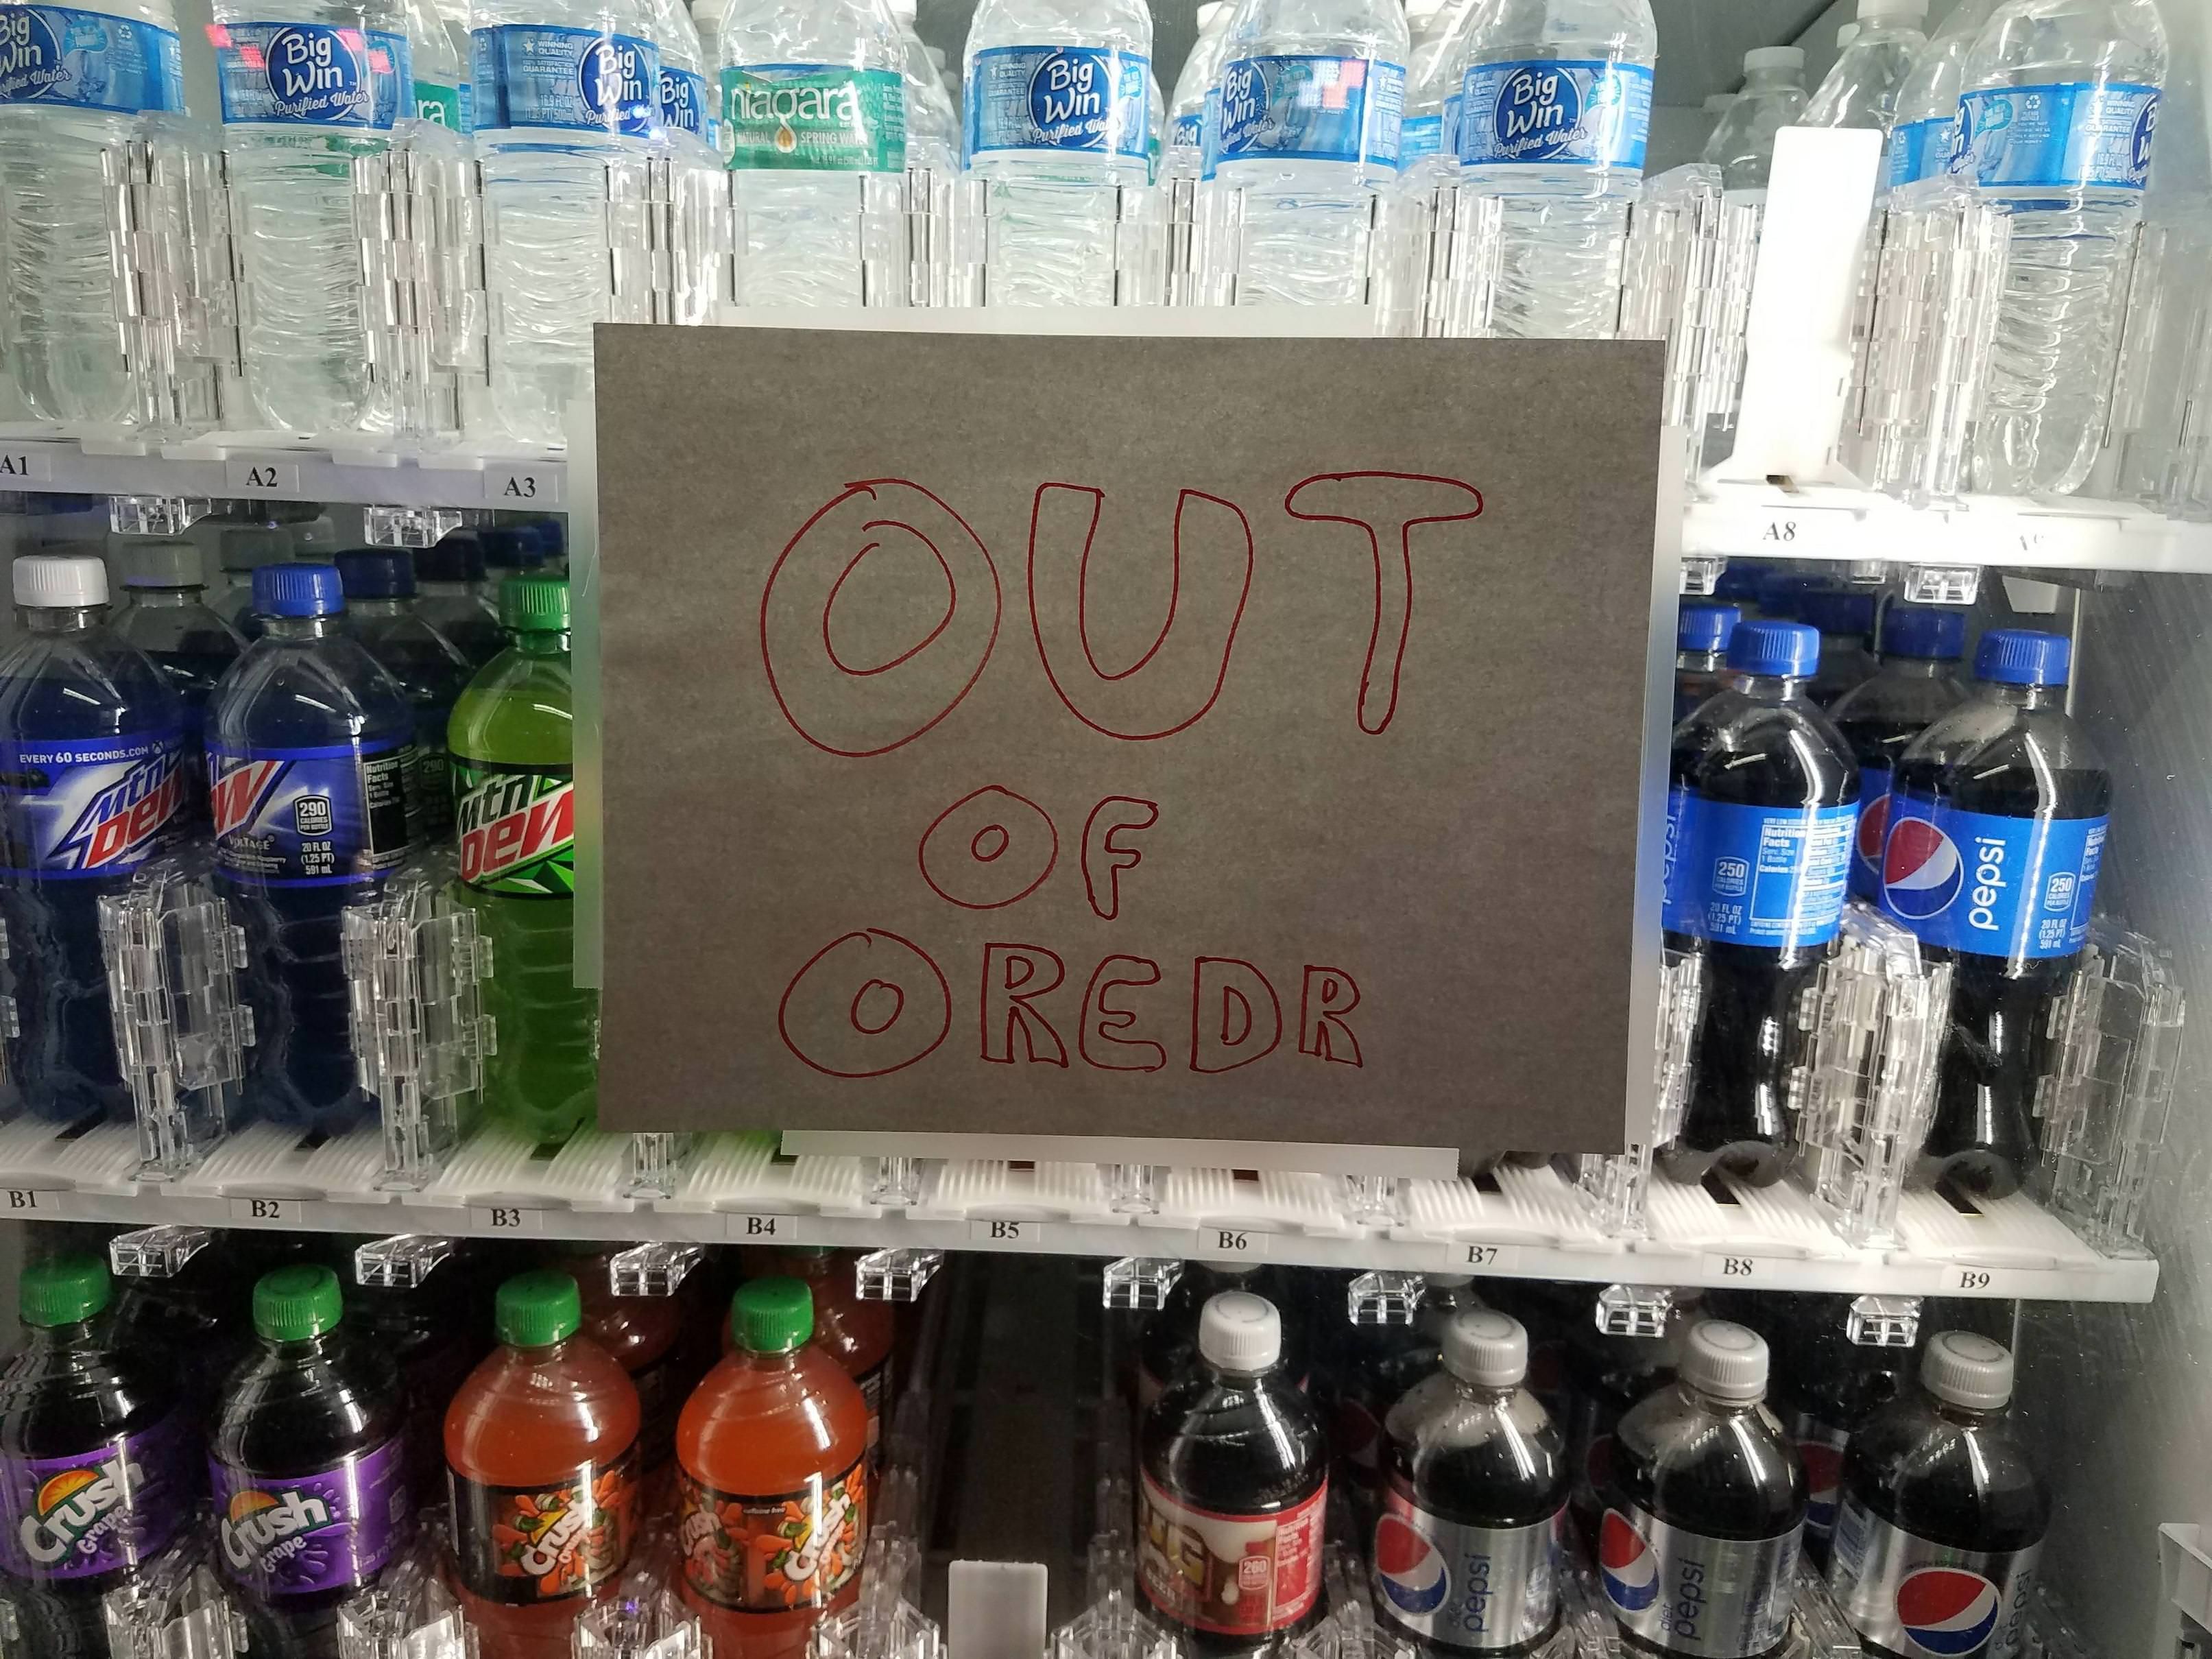 When your out of order sign is out of order...